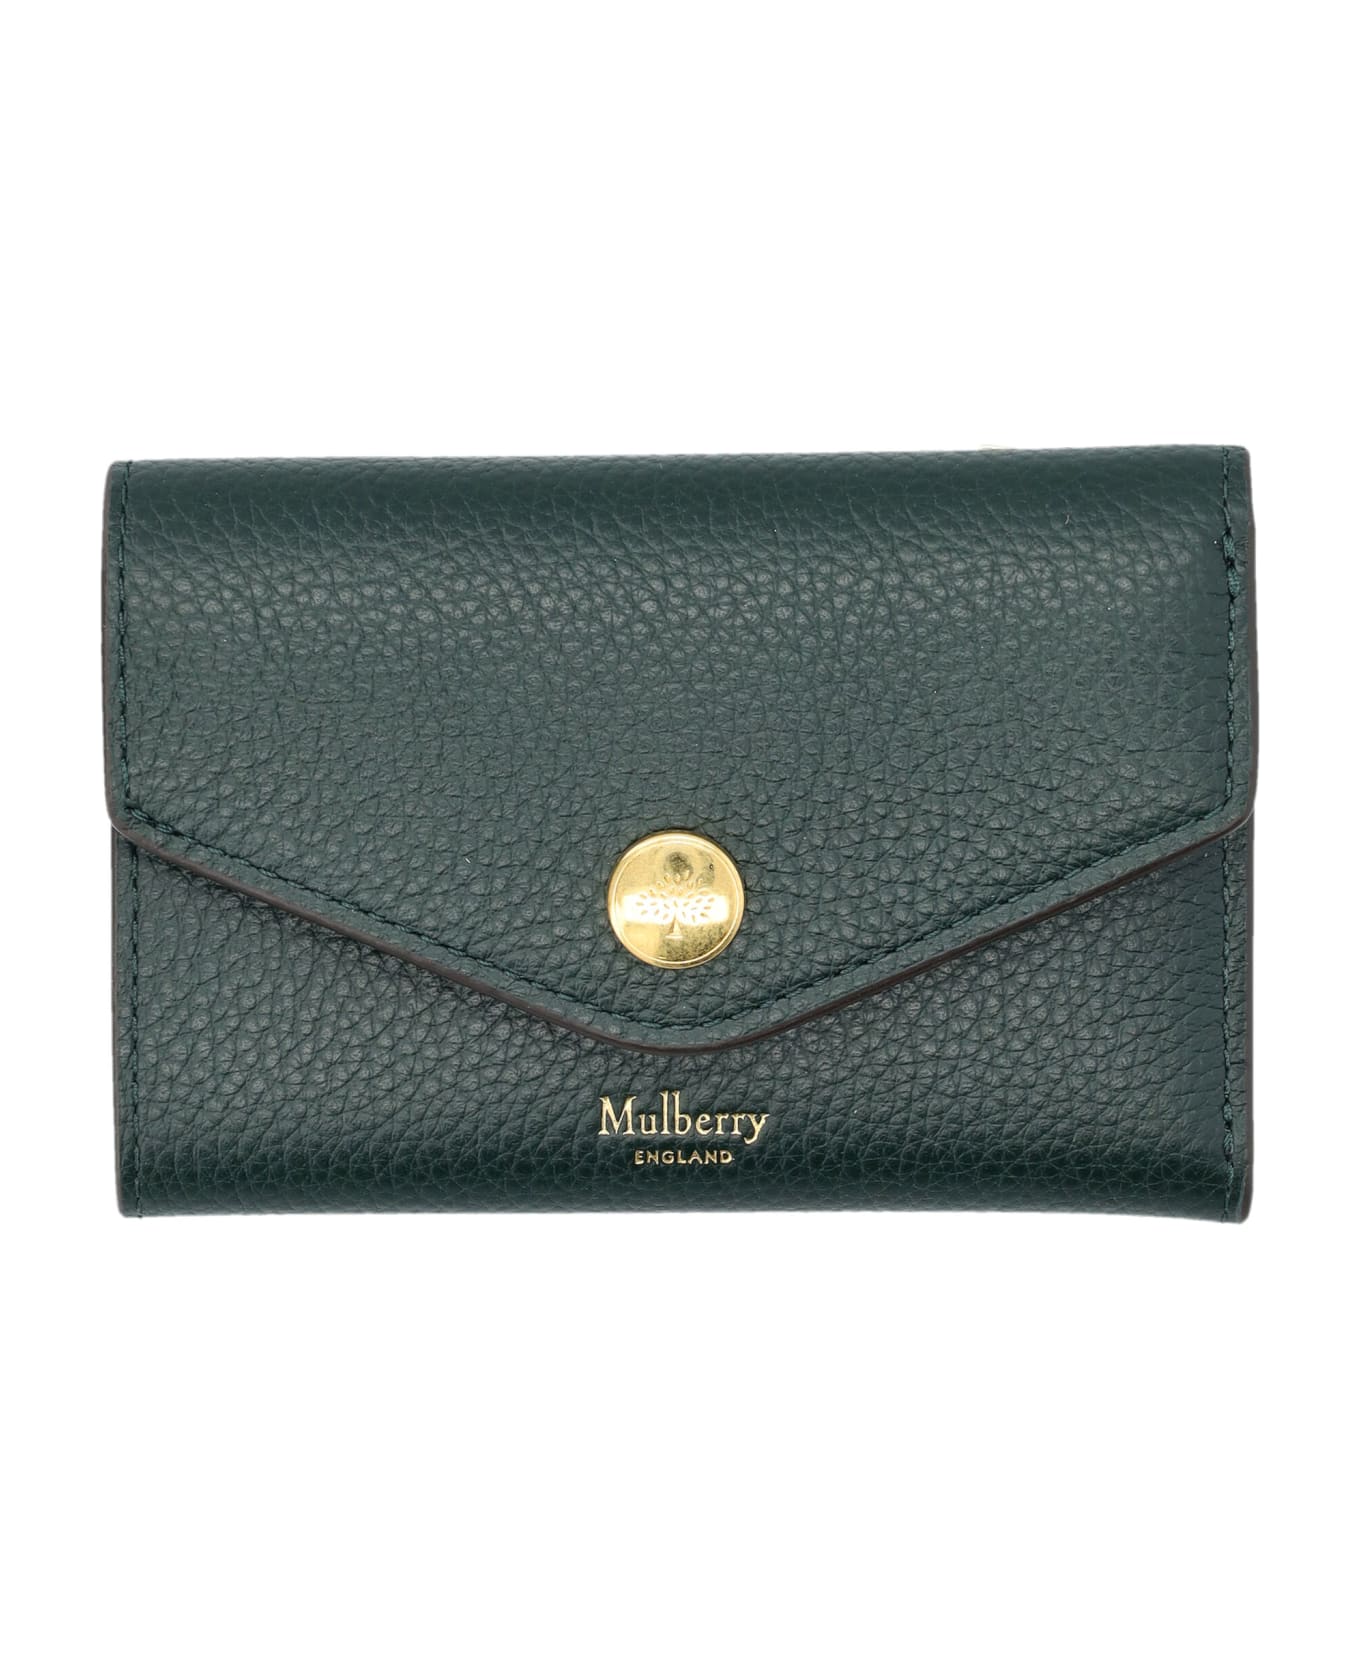 Mulberry Folded Multi-card Wallet - MULBERRY GREEN